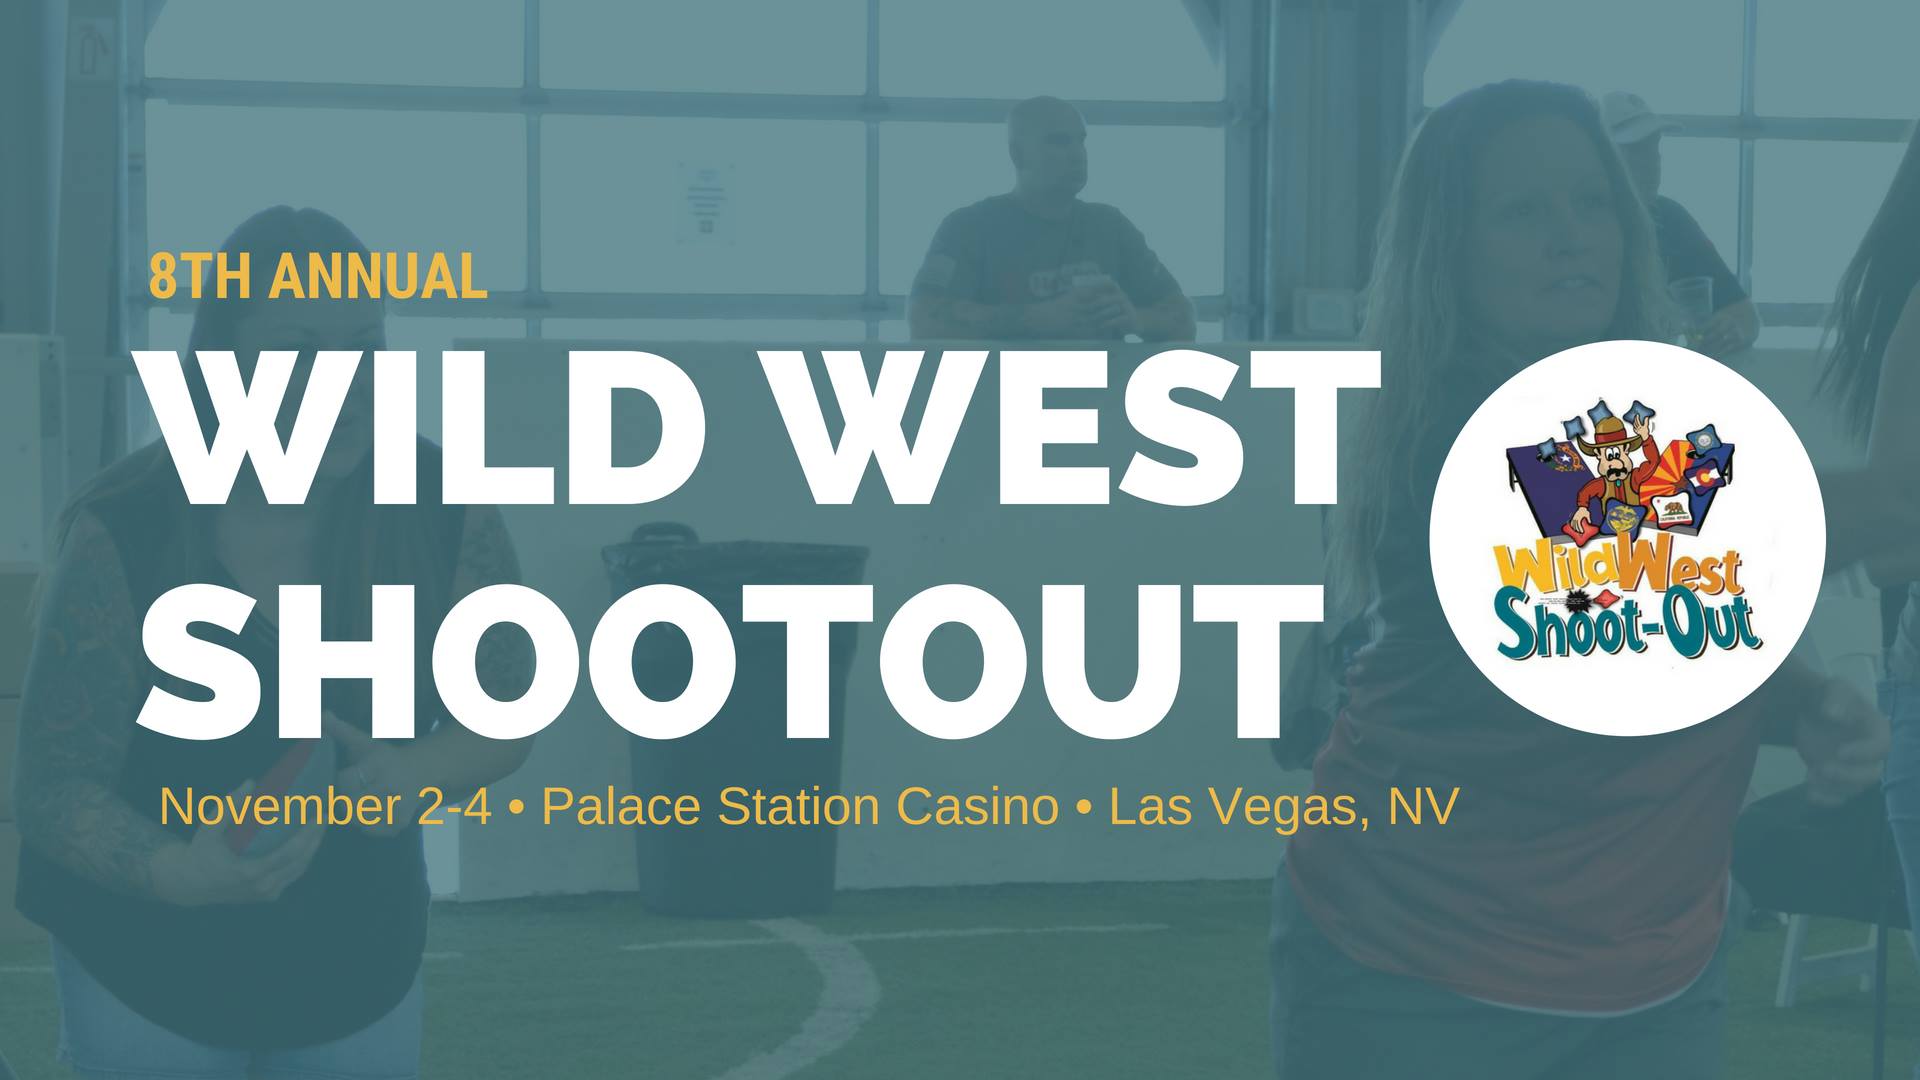 Palace Station Logo - 8th Annual Wild West Shootout @ Palace Station Hotel & Casio, Las ...